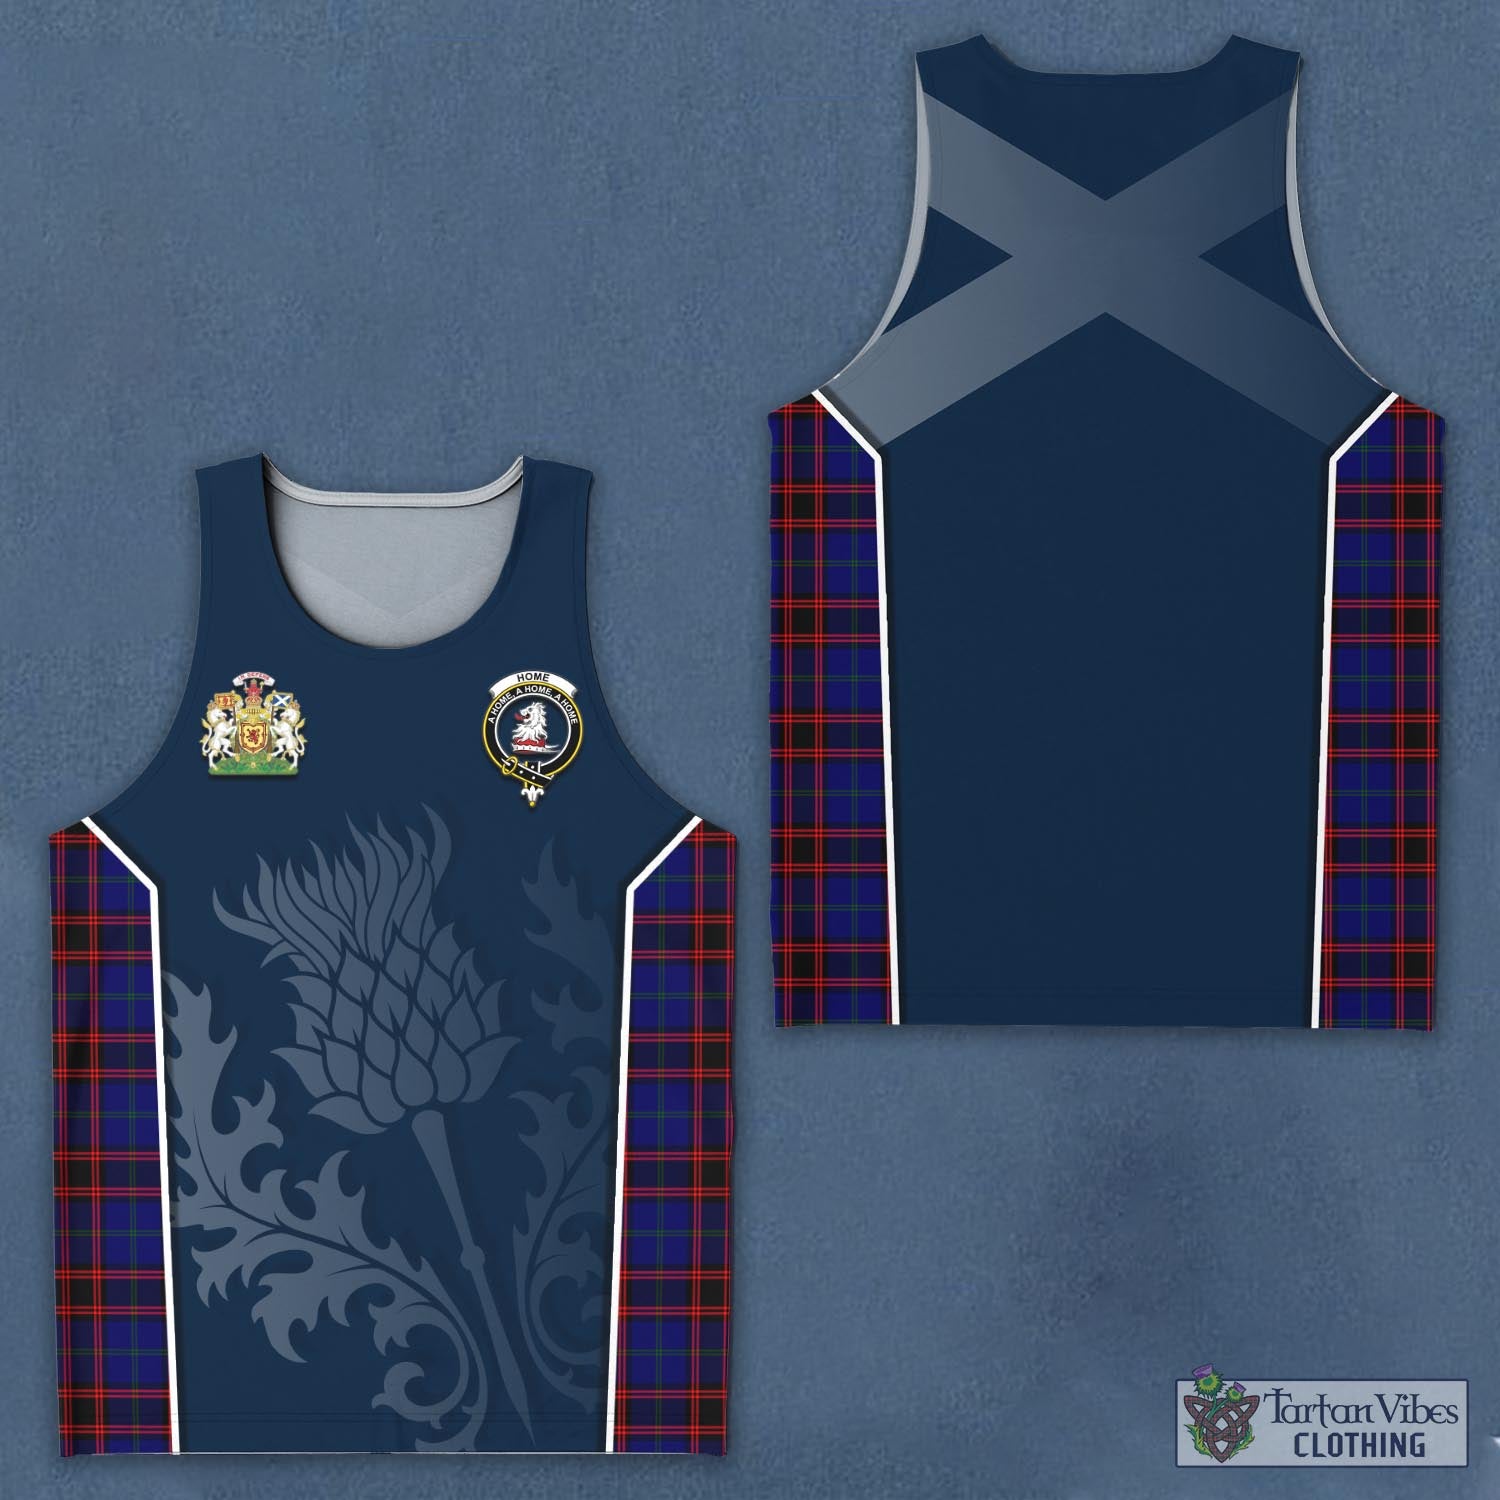 Tartan Vibes Clothing Home Modern Tartan Men's Tanks Top with Family Crest and Scottish Thistle Vibes Sport Style